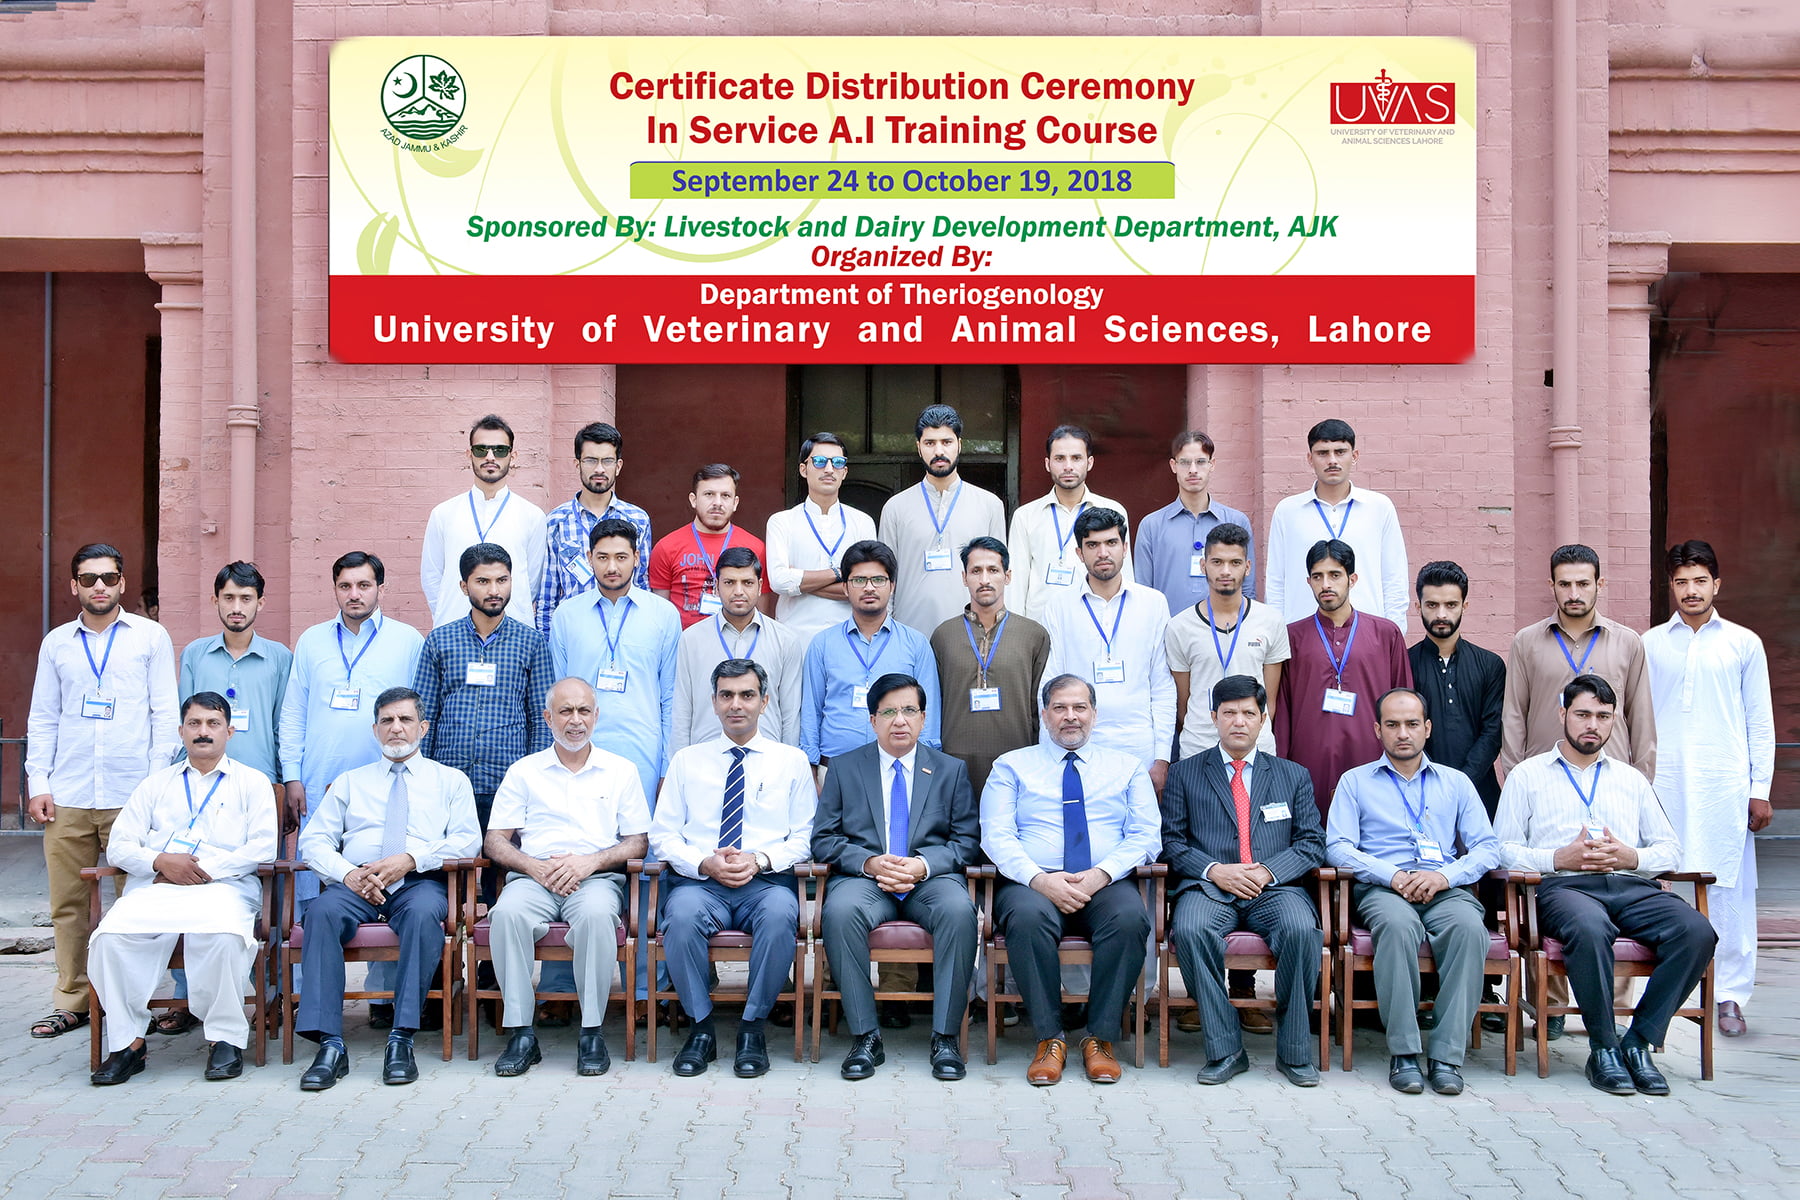 A.I Training Course Certificate Distribution